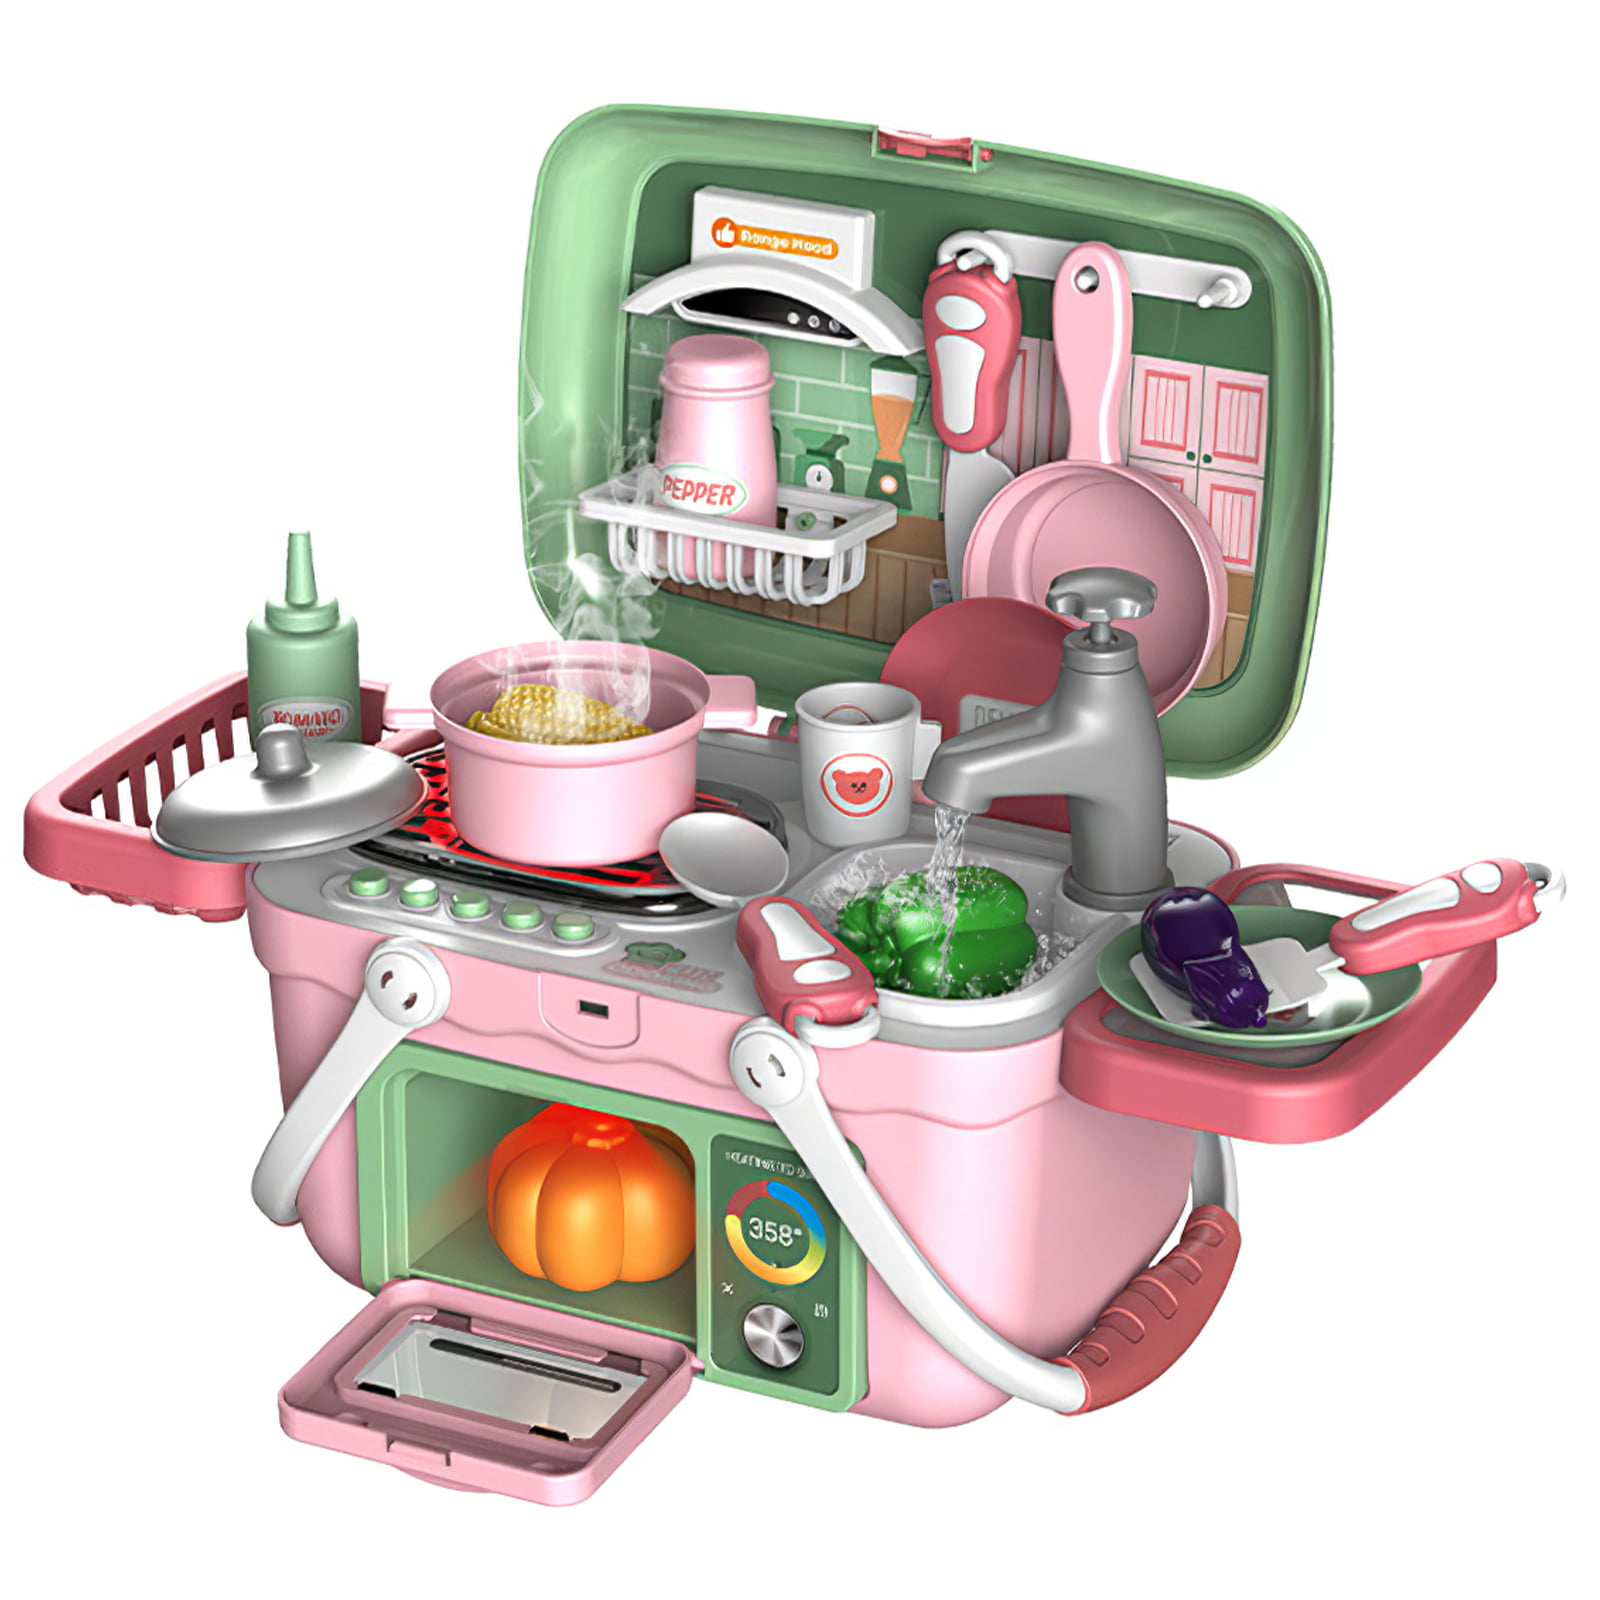 Details about   Girls Kitchen Playset Wooden Pretend Play Cooking Pans Food Baker Set Purple Toy 